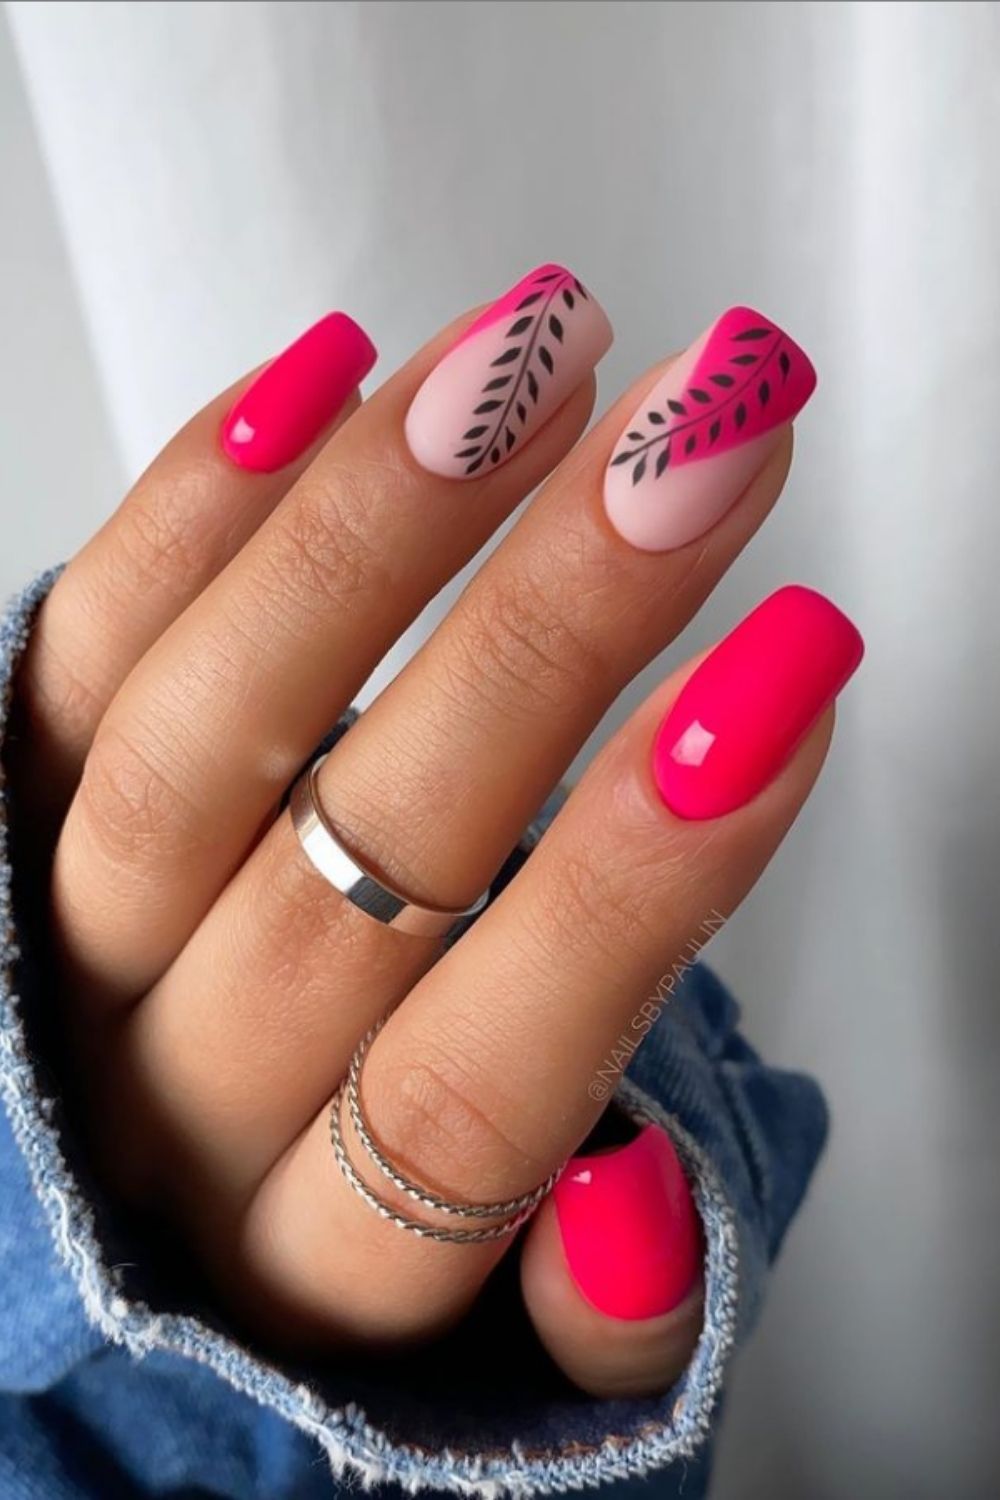 Short Nail Designs for Summer Nails Art in 2021